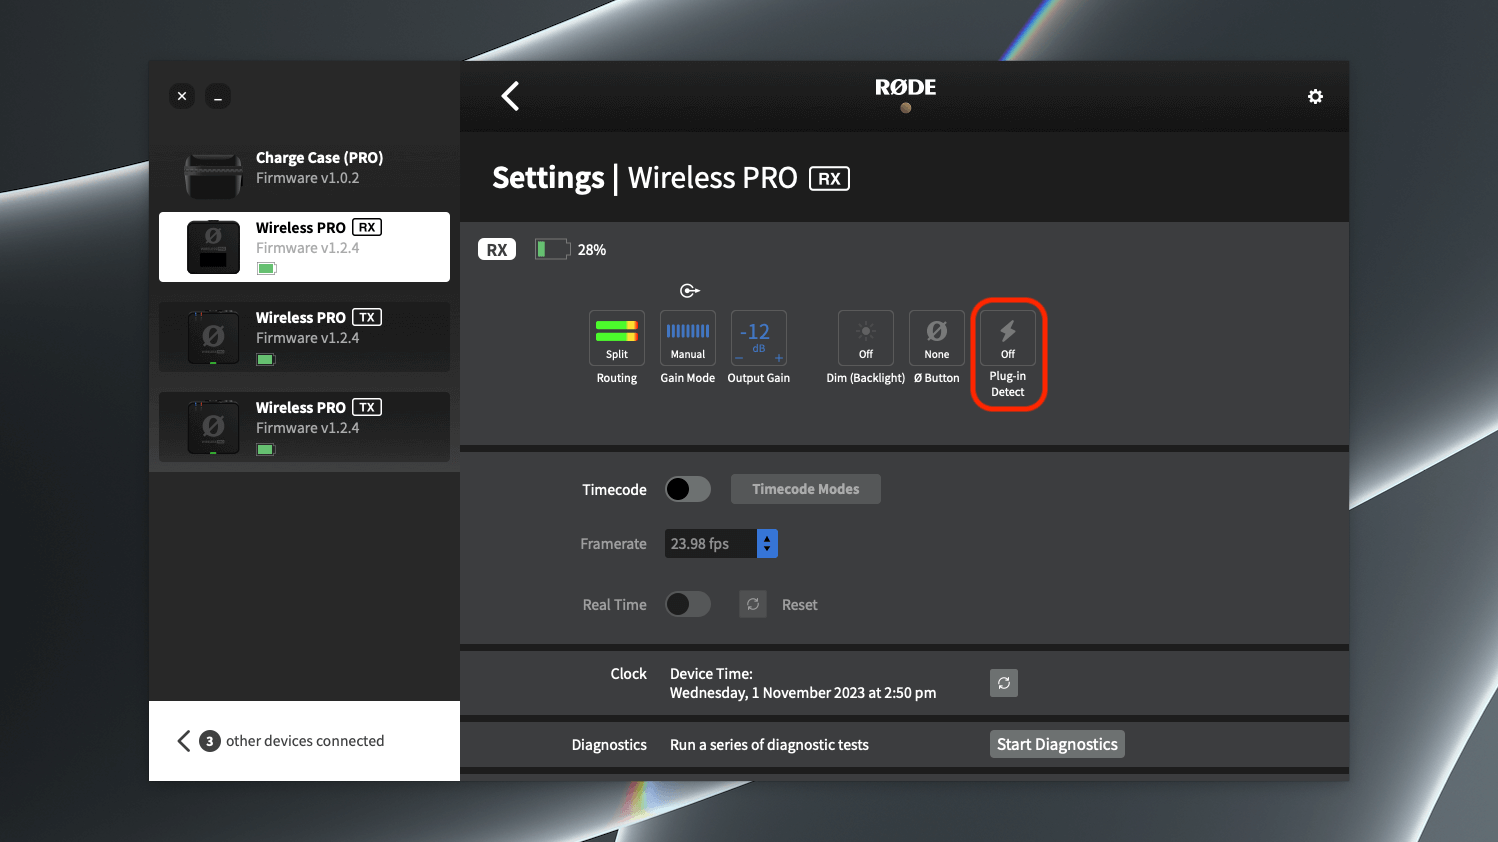 Wireless PRO Plug-in Detect feature in RØDE Central